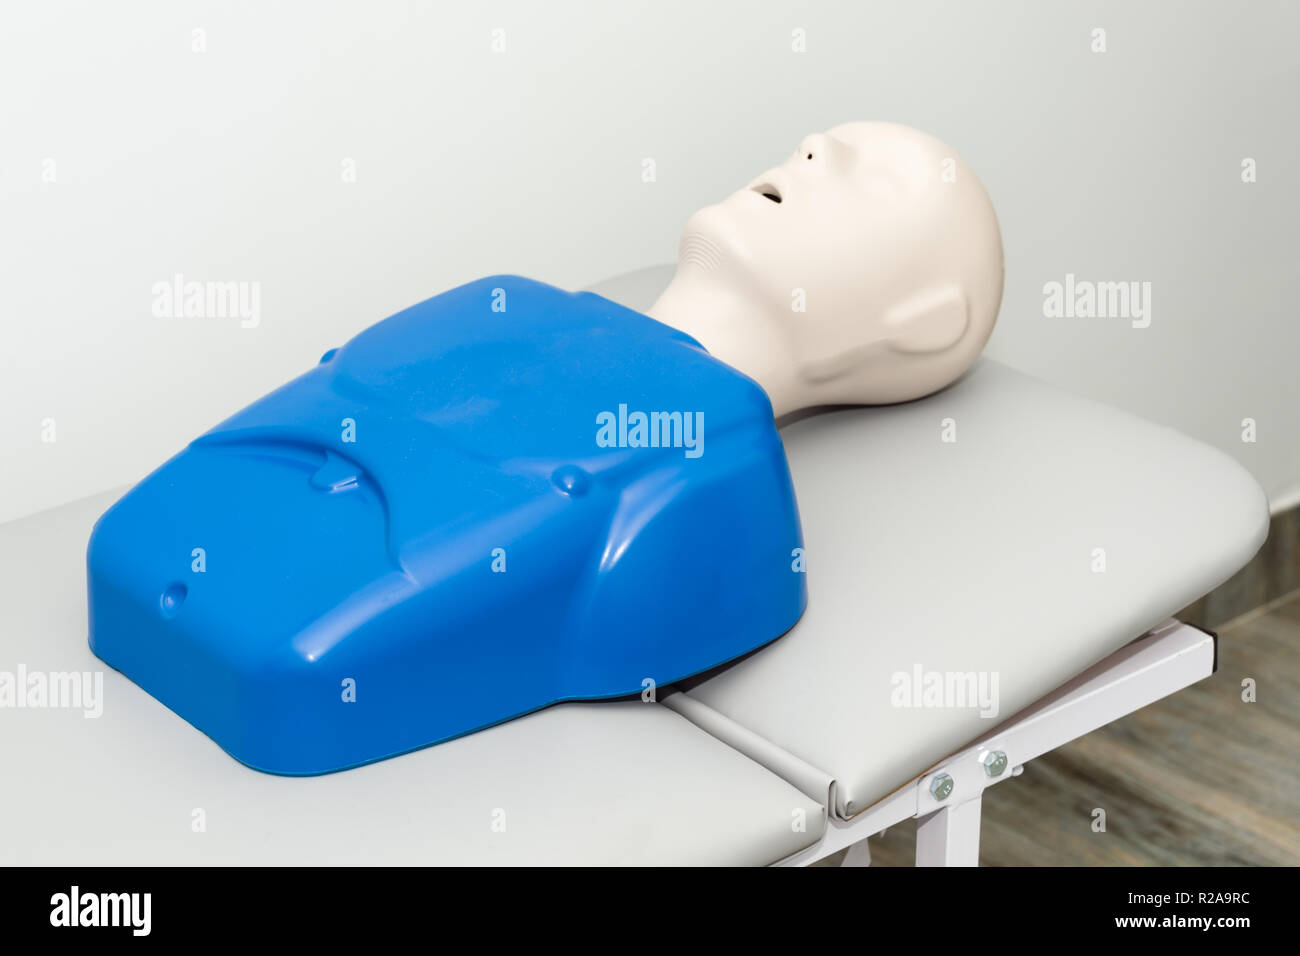 Hospital training dummy on hospital bed with mouth open. Horizontal image with copy space. Medical first aid learning training mannequin Stock Photo